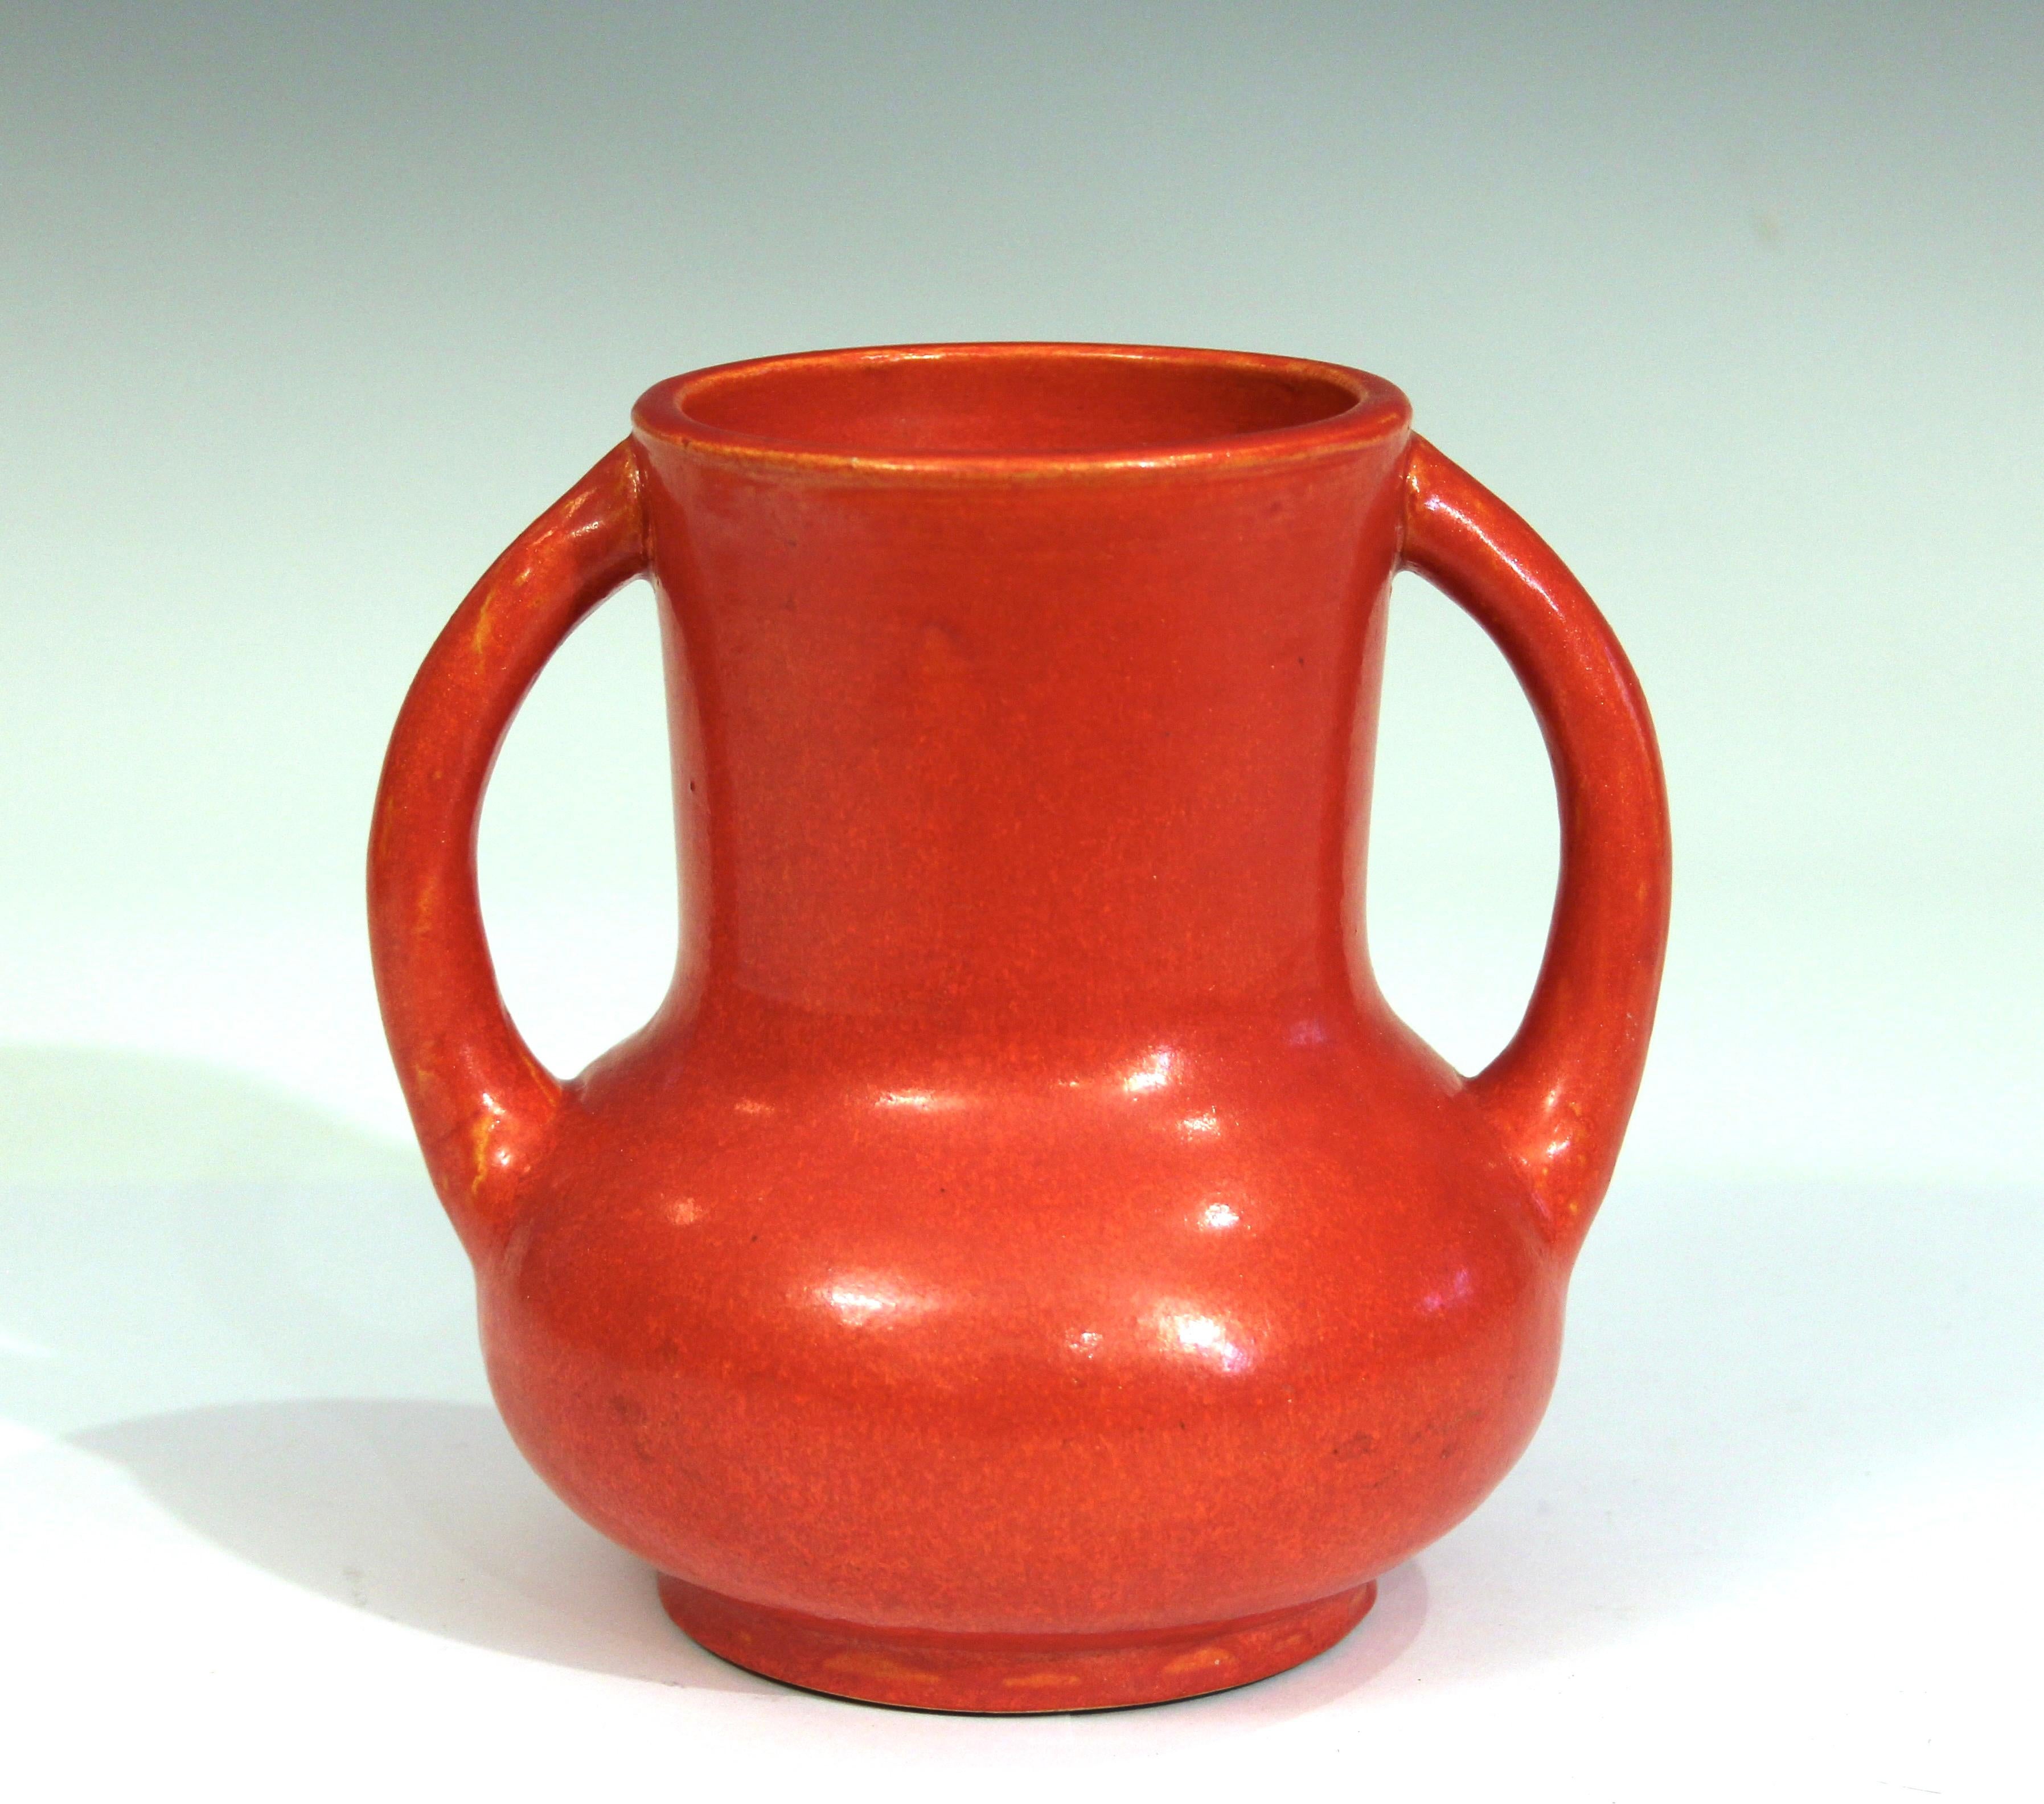 Old, hand turned, Awaji pottery vase in great, variegated chrome red glaze, circa 1930. Impressed marks on base partially obscured by the glaze. 5 1/2